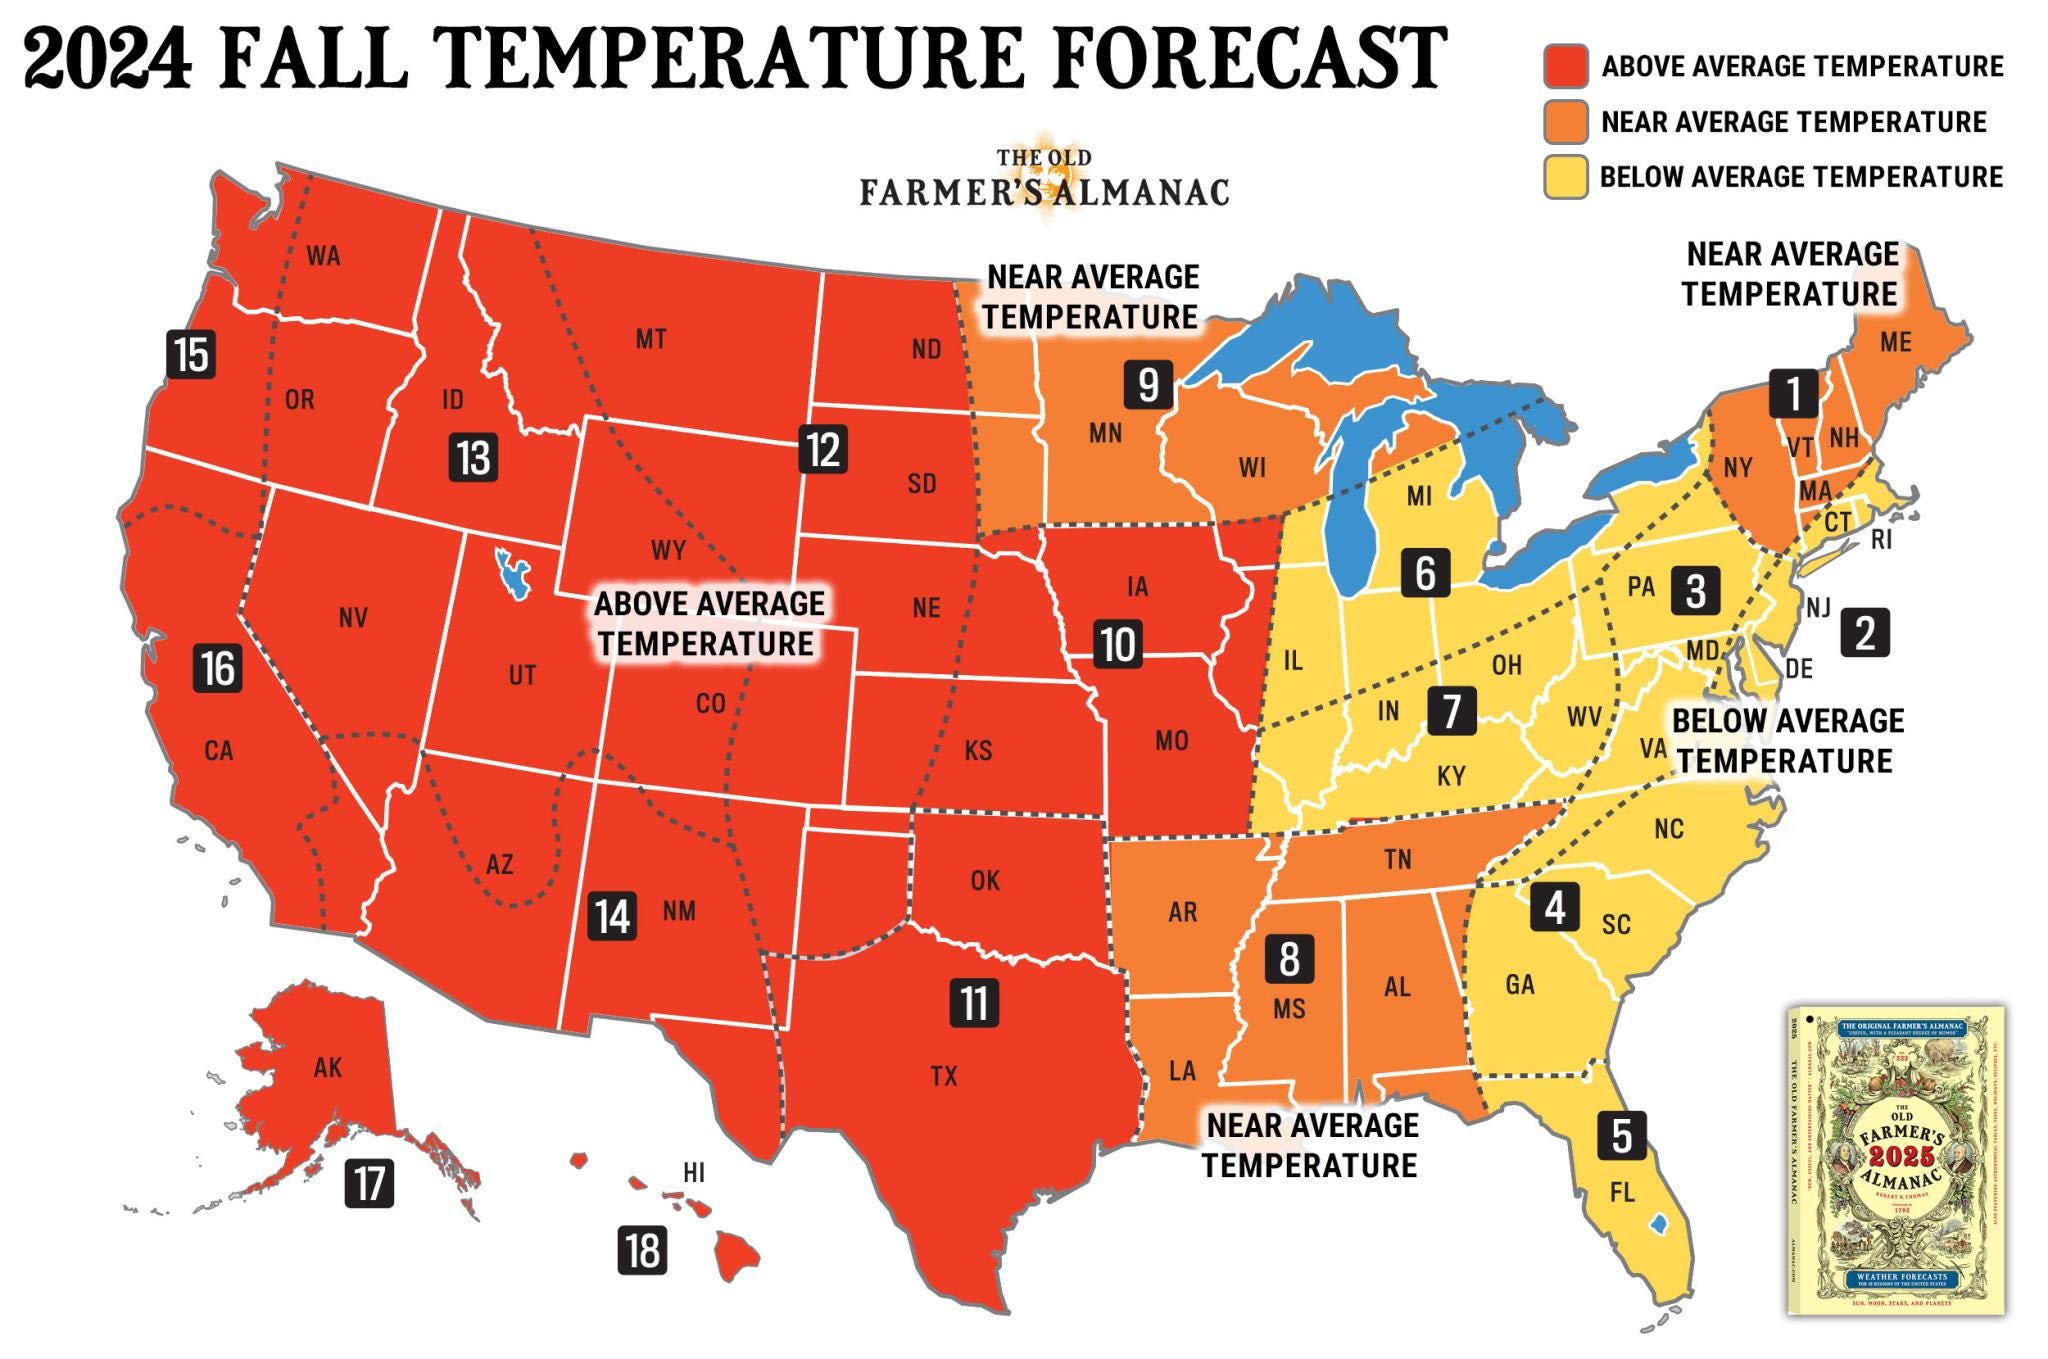 Tired of the heat? Here's what the Old Farmer's Almanac predicts for 2024 fall RI weather